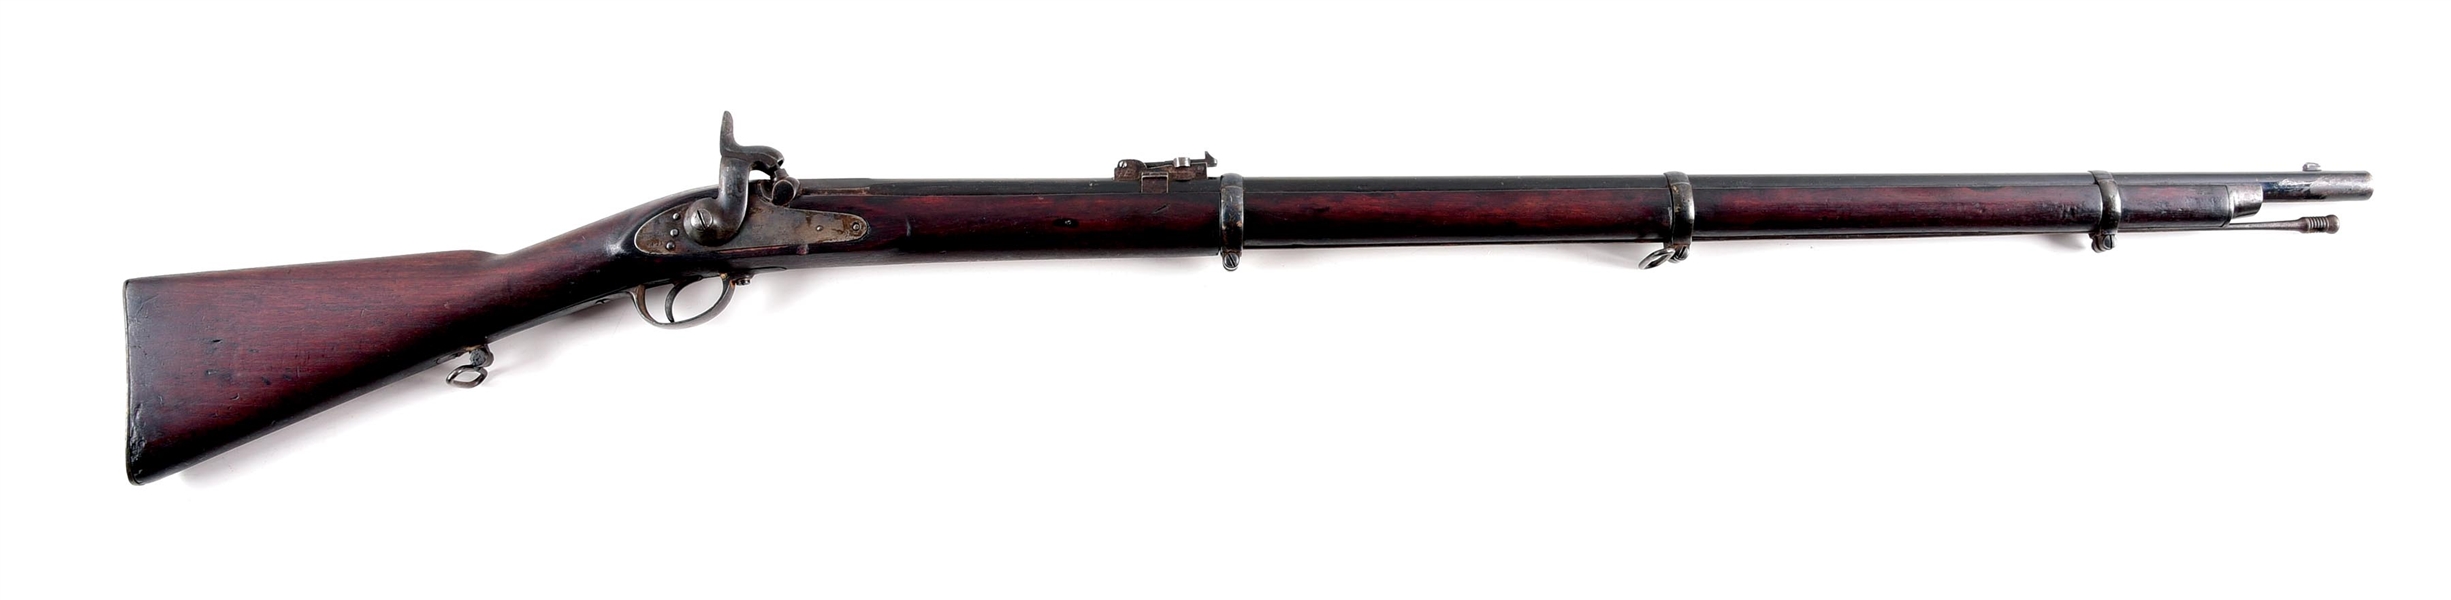 (A) SCARCE SPANISH MODEL 1857 ENFIELD RIFLED MUSKET DATED 1865.